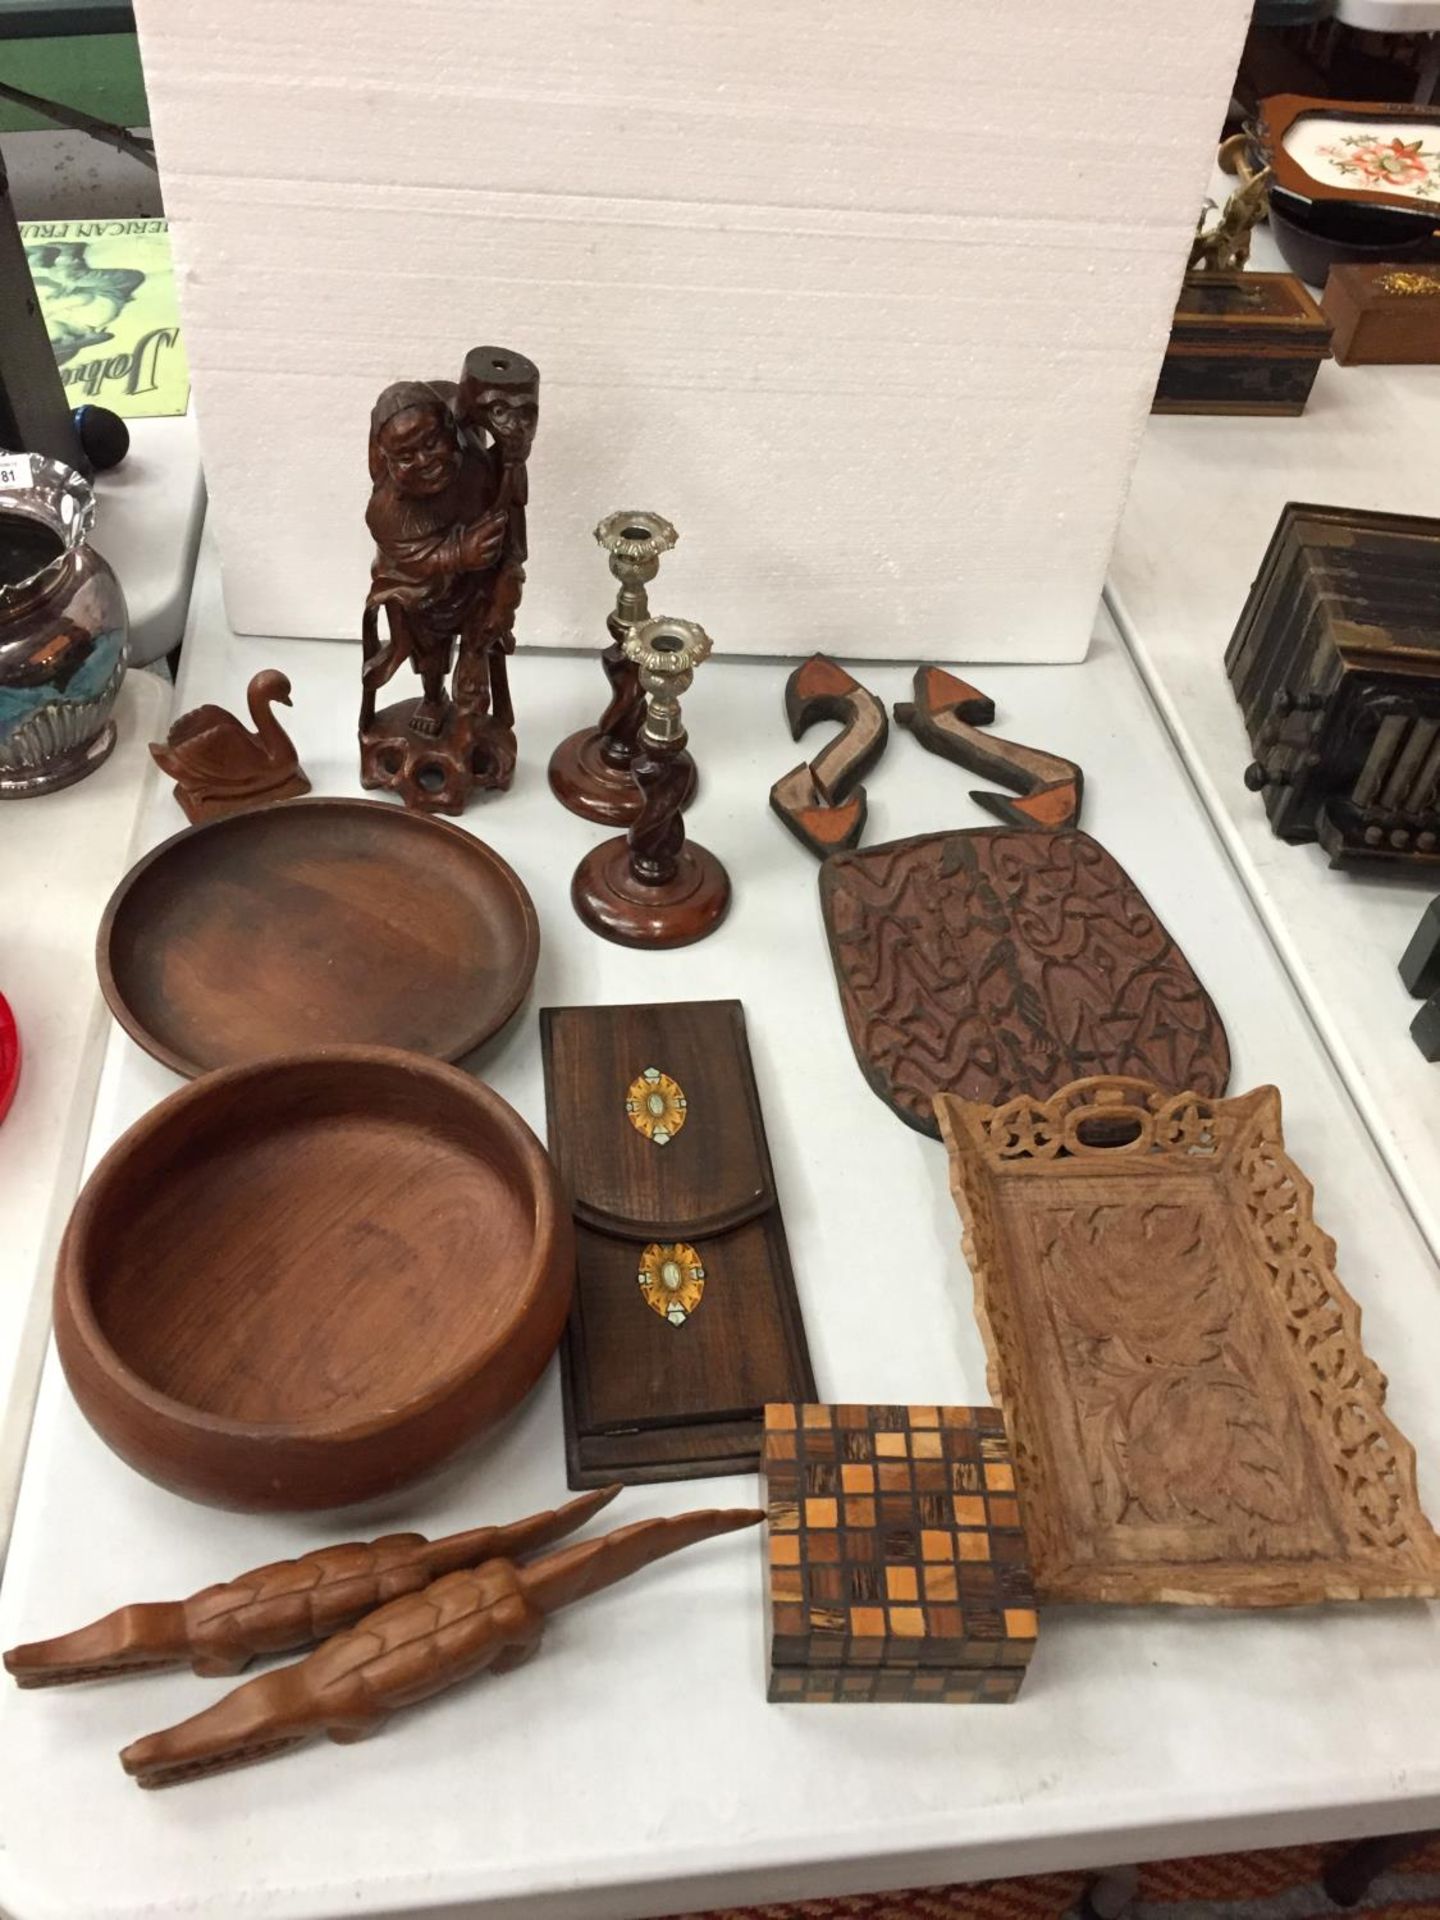 A SELECTION OF TREEN TO INCLUDE A BOOK STAND, A PAIR OF CANDLESTICKS, TRIBAL FIGURINES AND A